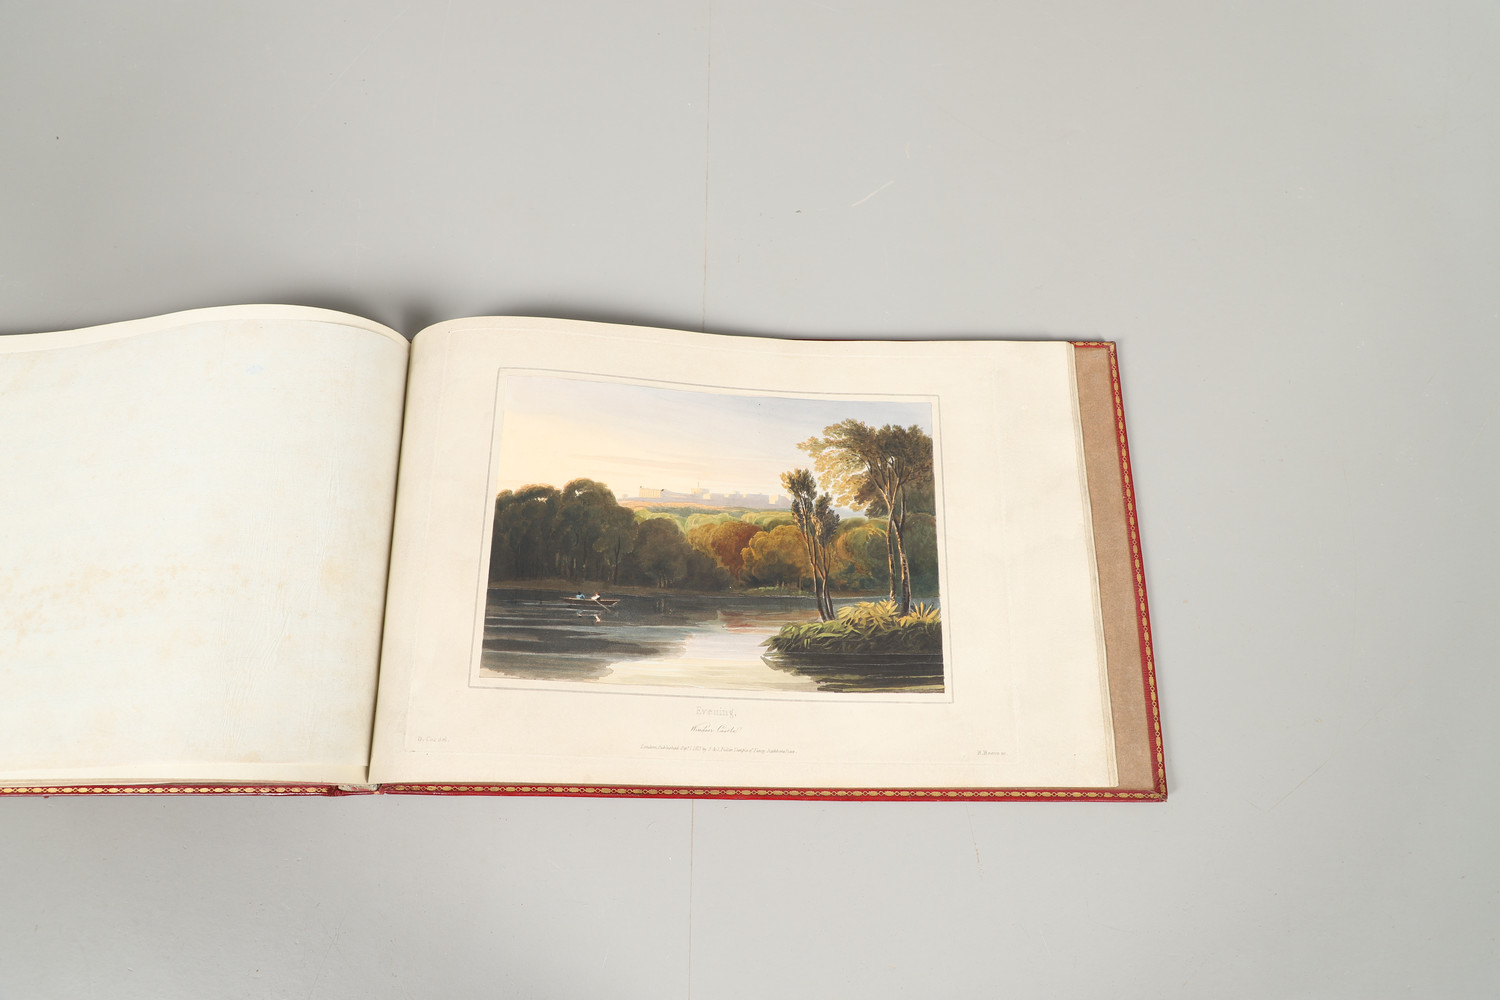 DAVID COX. A Treatise on Landscape Painting, 1814. - Image 6 of 9